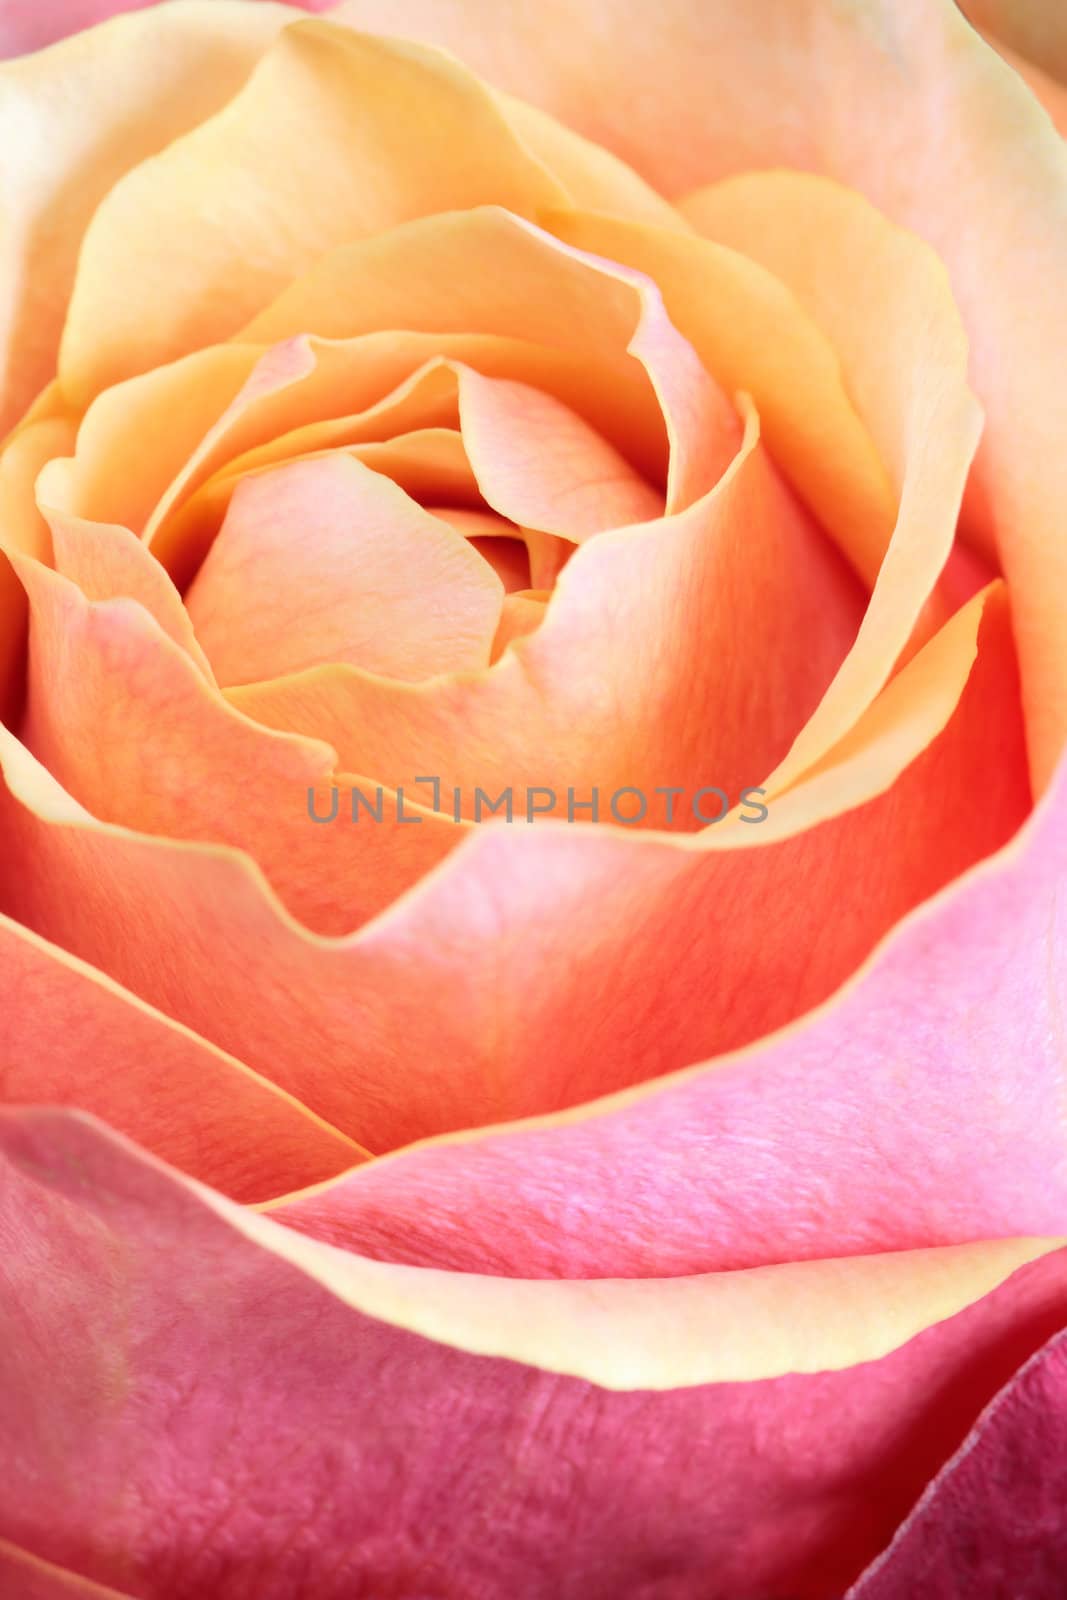 Macro, shallow depth of field image of a single orange and pink rose.  Focus on edges of petals.
